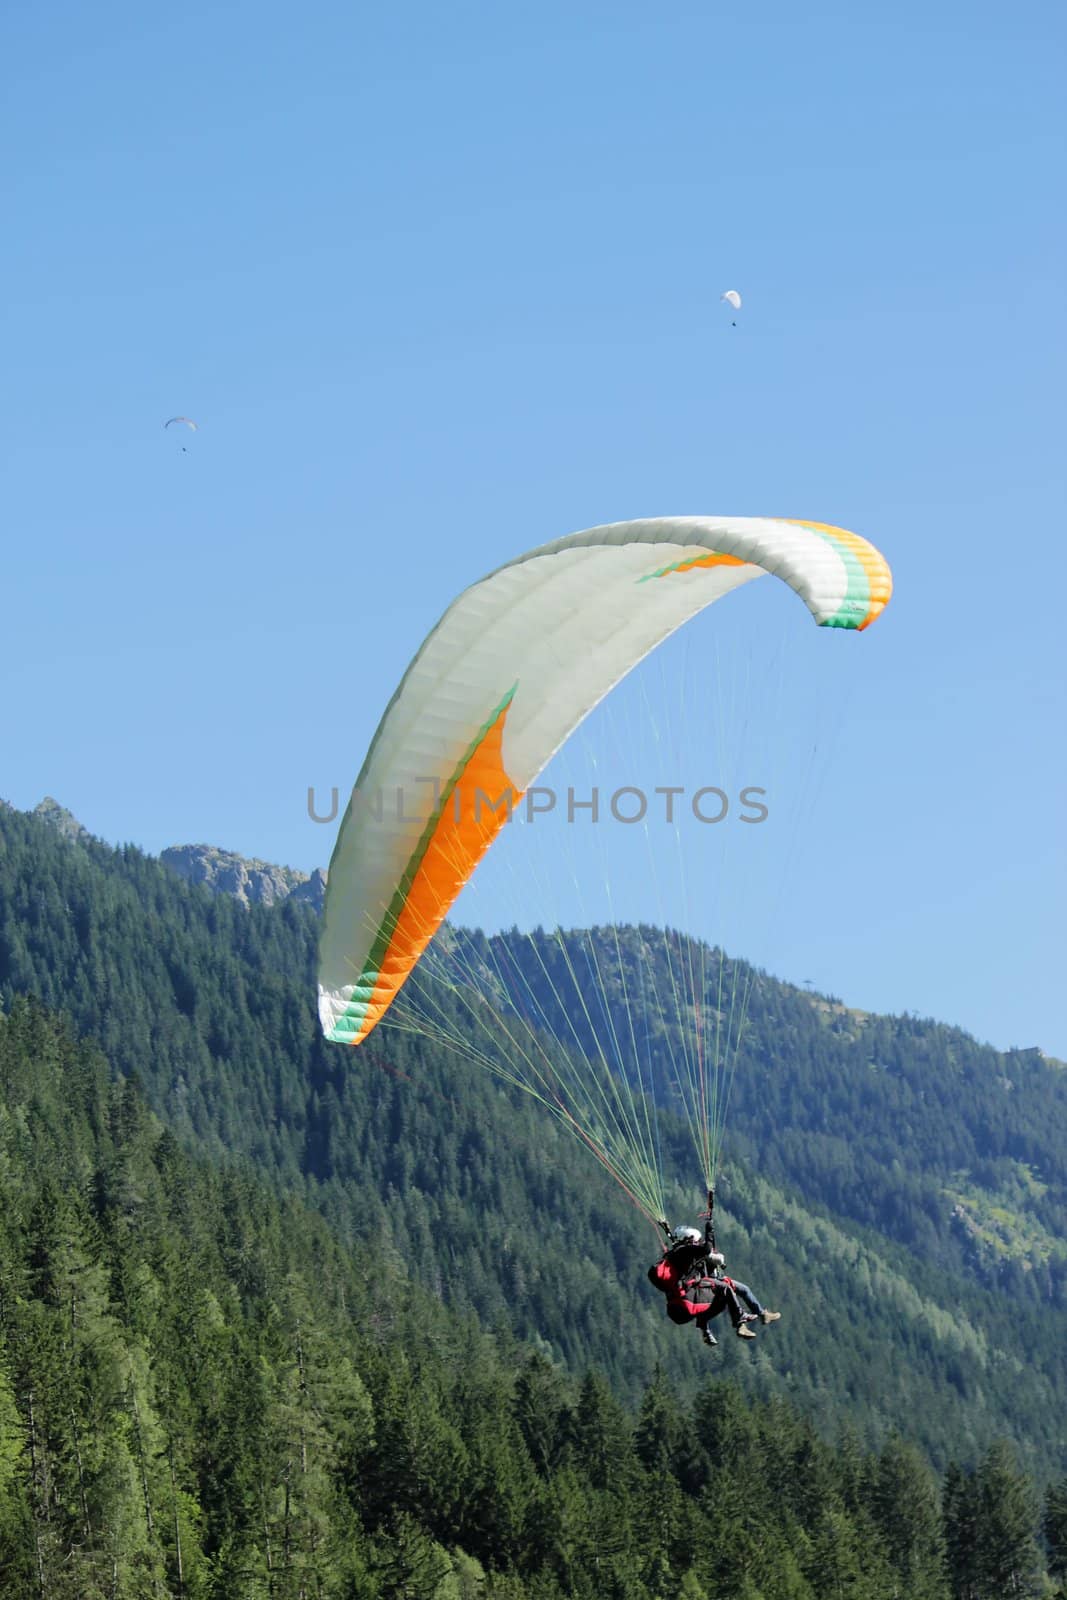 Paragliding tandem upon the Alps mountains and fir trees by beautiful day in Chamonix, France